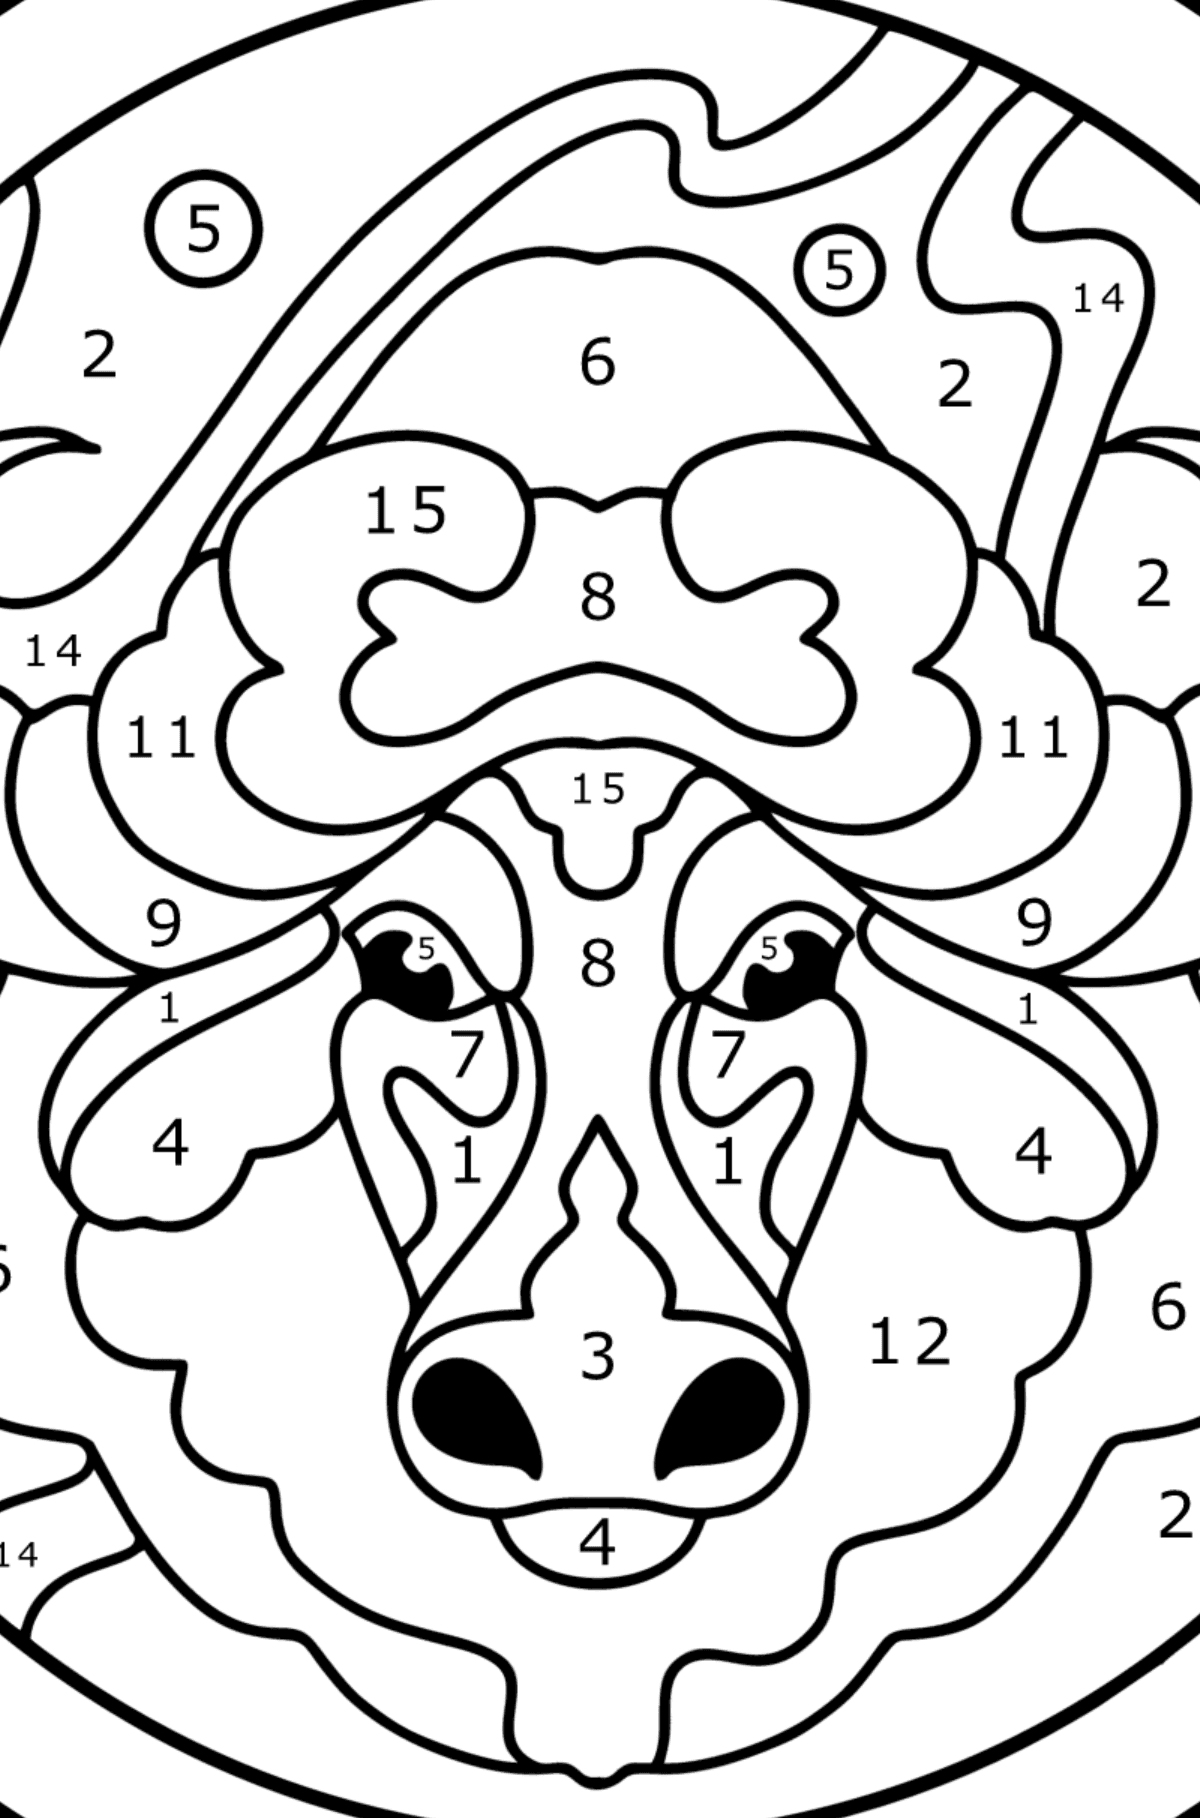 Coloring page for kids - zodiac sign Taurus - Coloring by Numbers for Kids